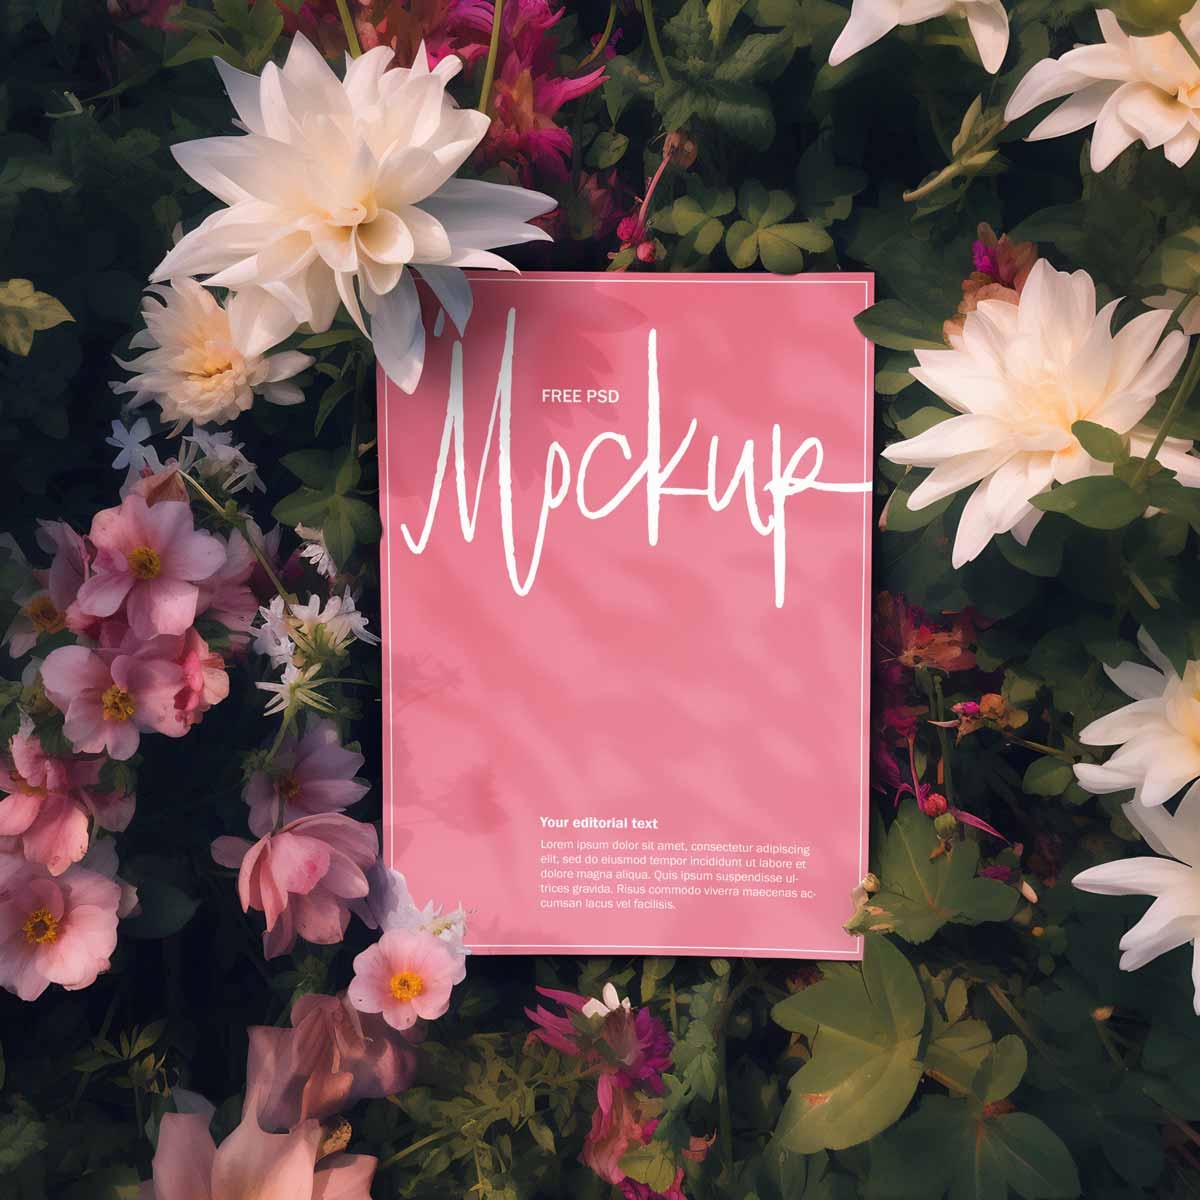 DIN A4 poster lying in flowers psd mockup